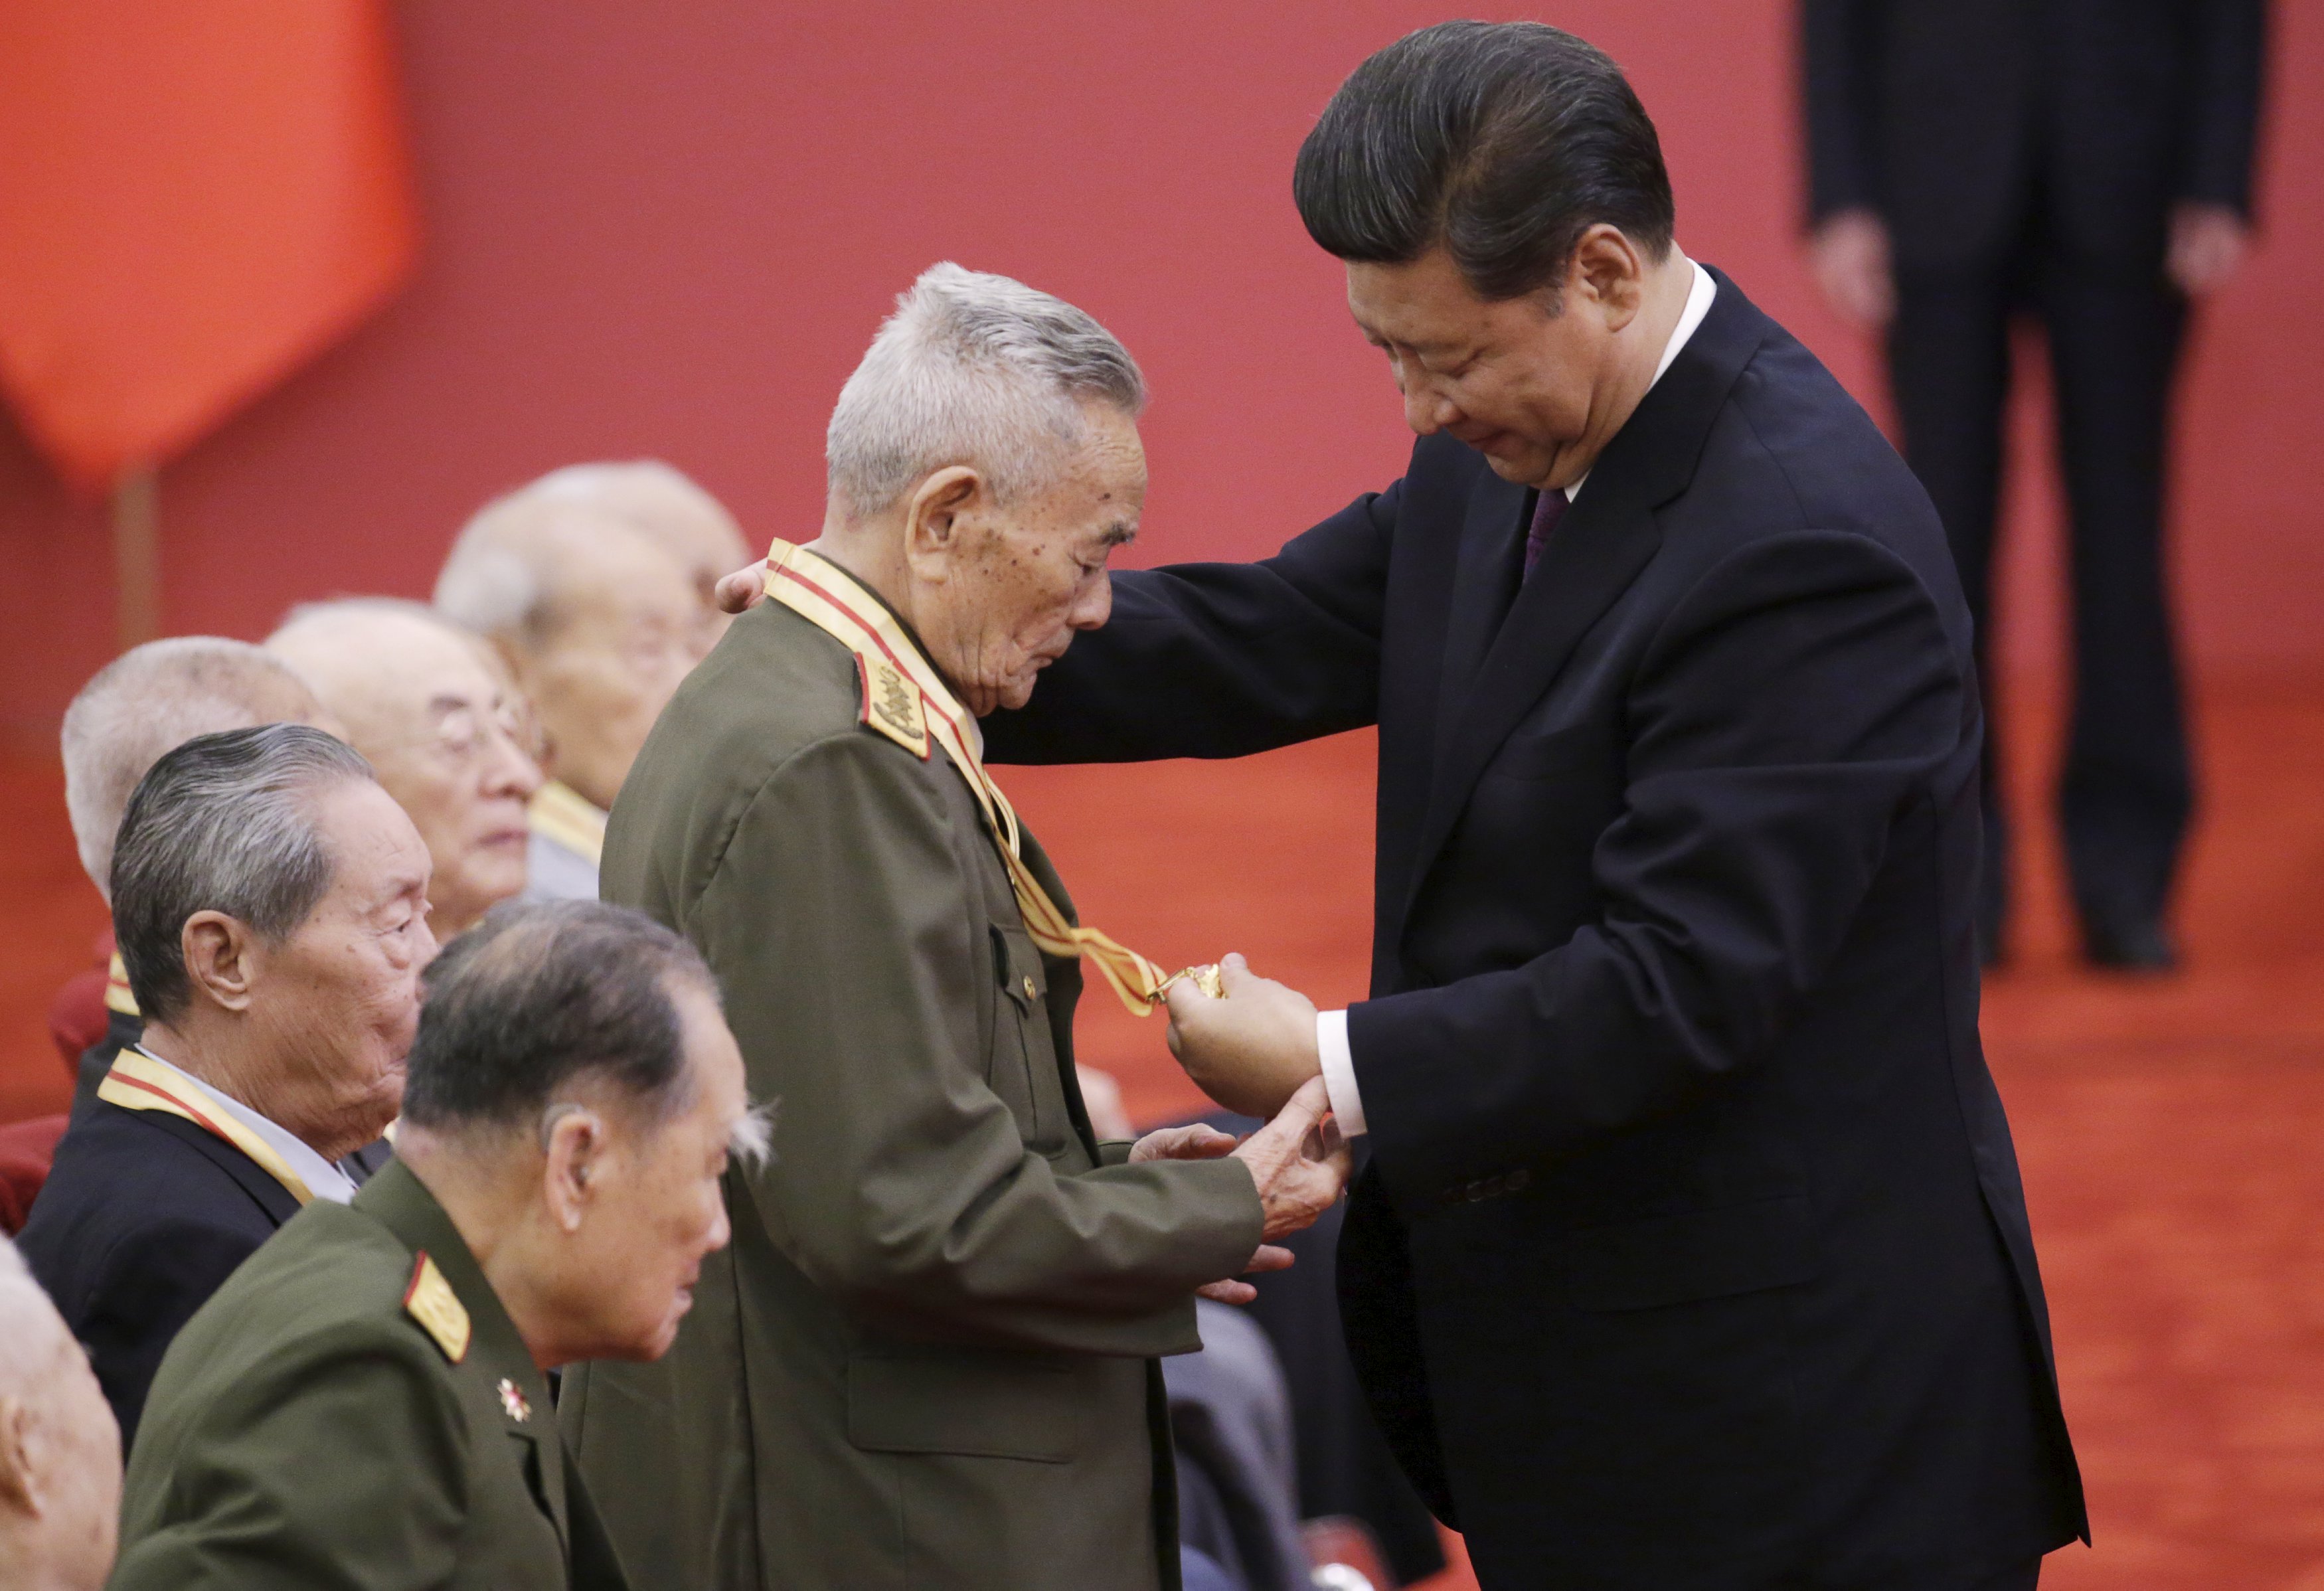 President Xi Jinping and a war veteran look at a commemorative medal at a medal ceremony at the Great Hall of the People in Beijing. Photo: Reuters